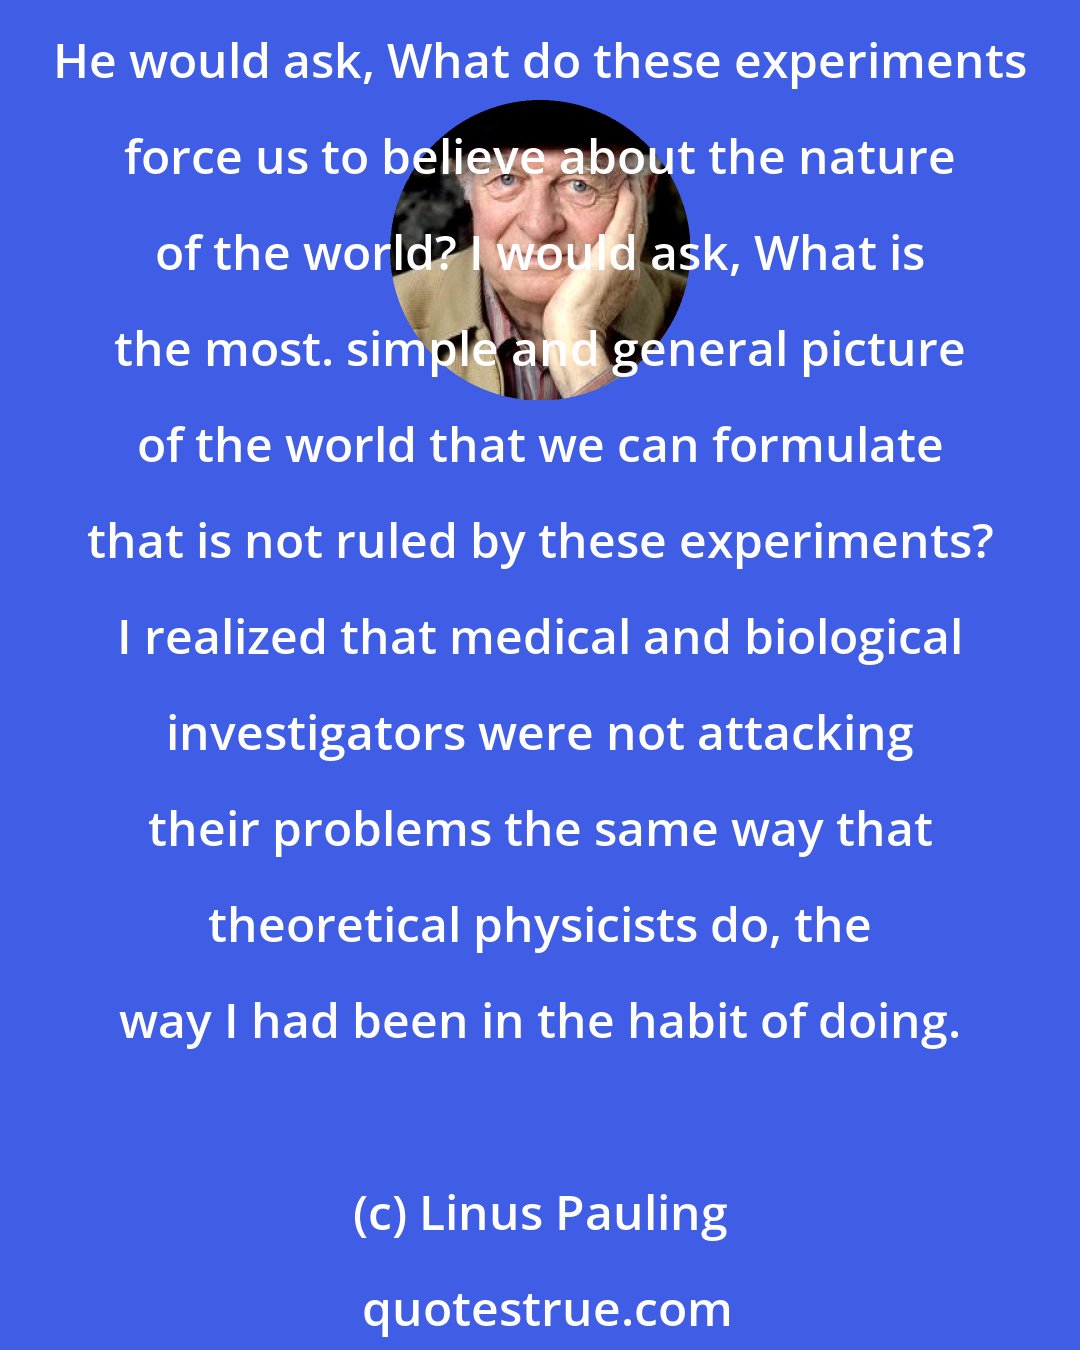 Linus Pauling: During the time that [Karl] Landsteiner gave me an education in the field of imununology, I discovered that he and I were thinking about the serologic problem in very different ways. He would ask, What do these experiments force us to believe about the nature of the world? I would ask, What is the most. simple and general picture of the world that we can formulate that is not ruled by these experiments? I realized that medical and biological investigators were not attacking their problems the same way that theoretical physicists do, the way I had been in the habit of doing.